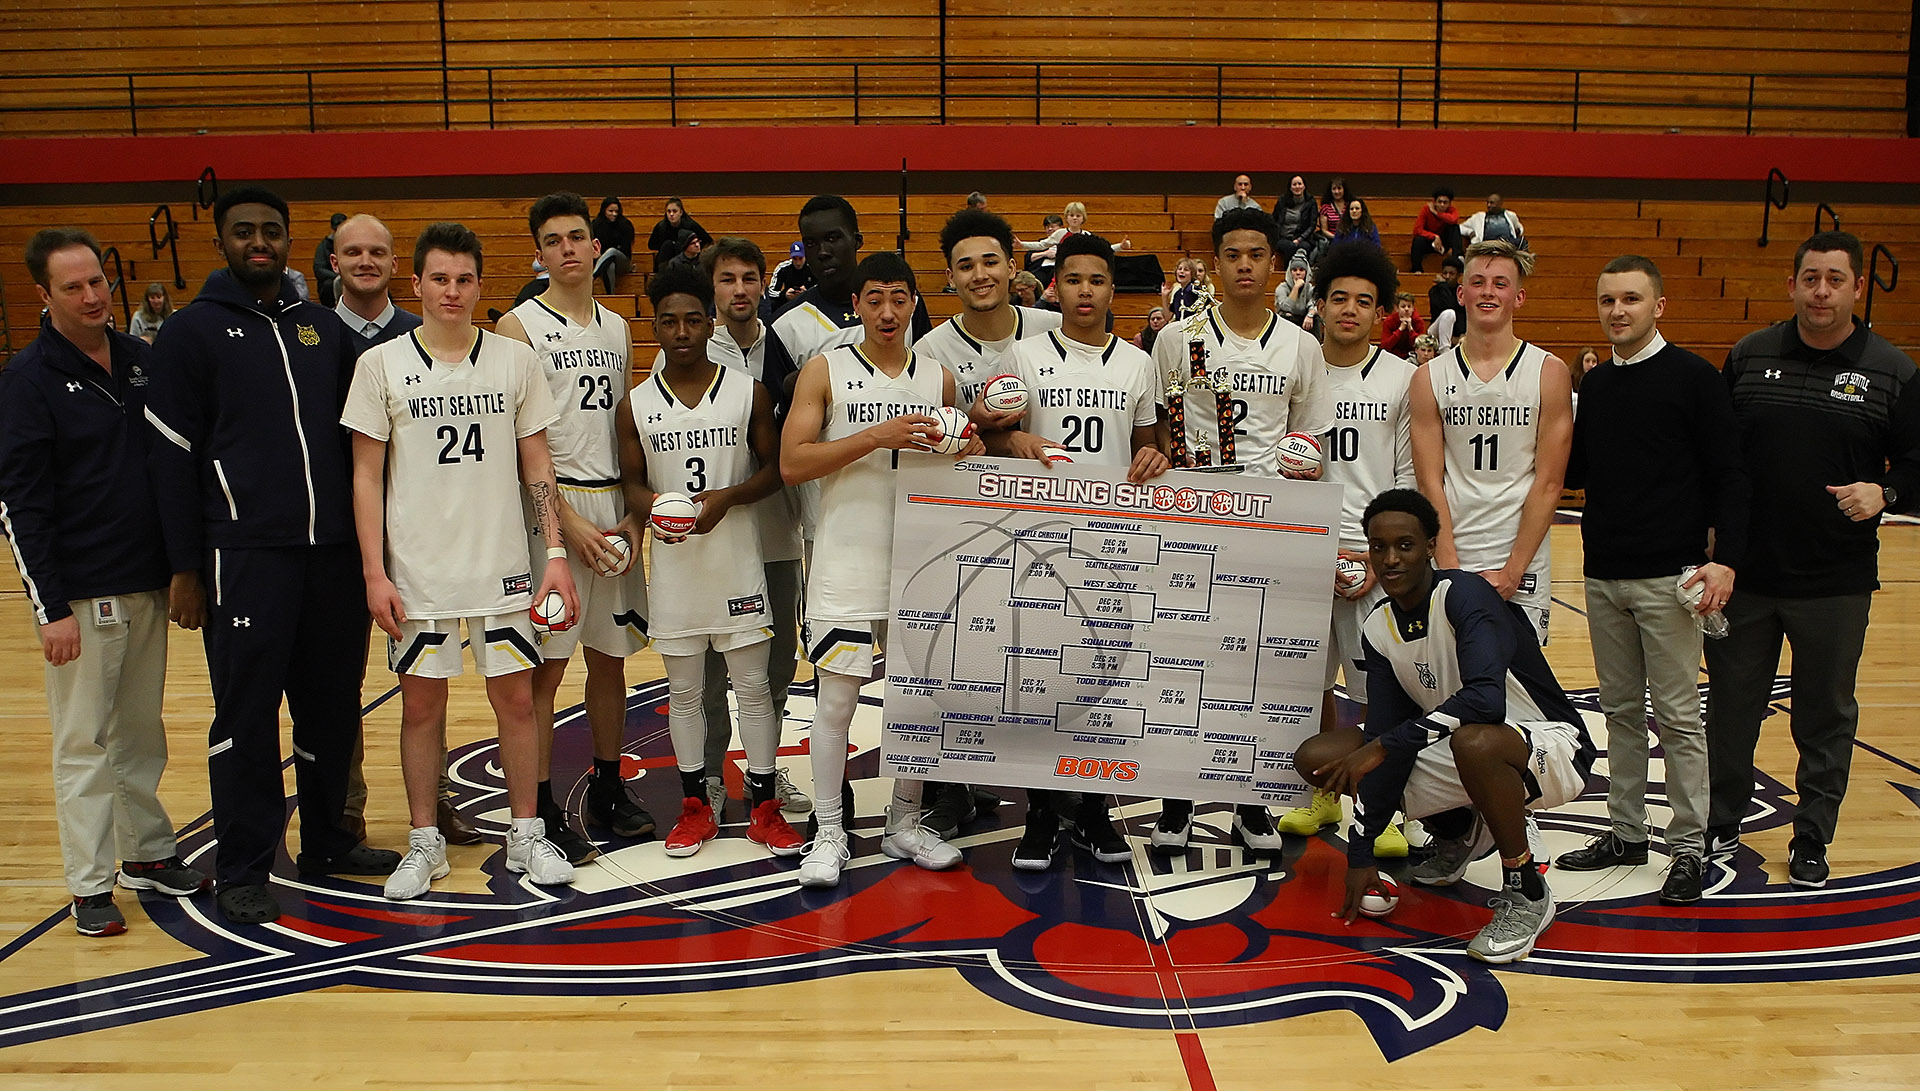 A team photo of the West Seattle Wildcats, winners at the Sterling Christmas Shootout tournament at Kennedy Catholic High School.